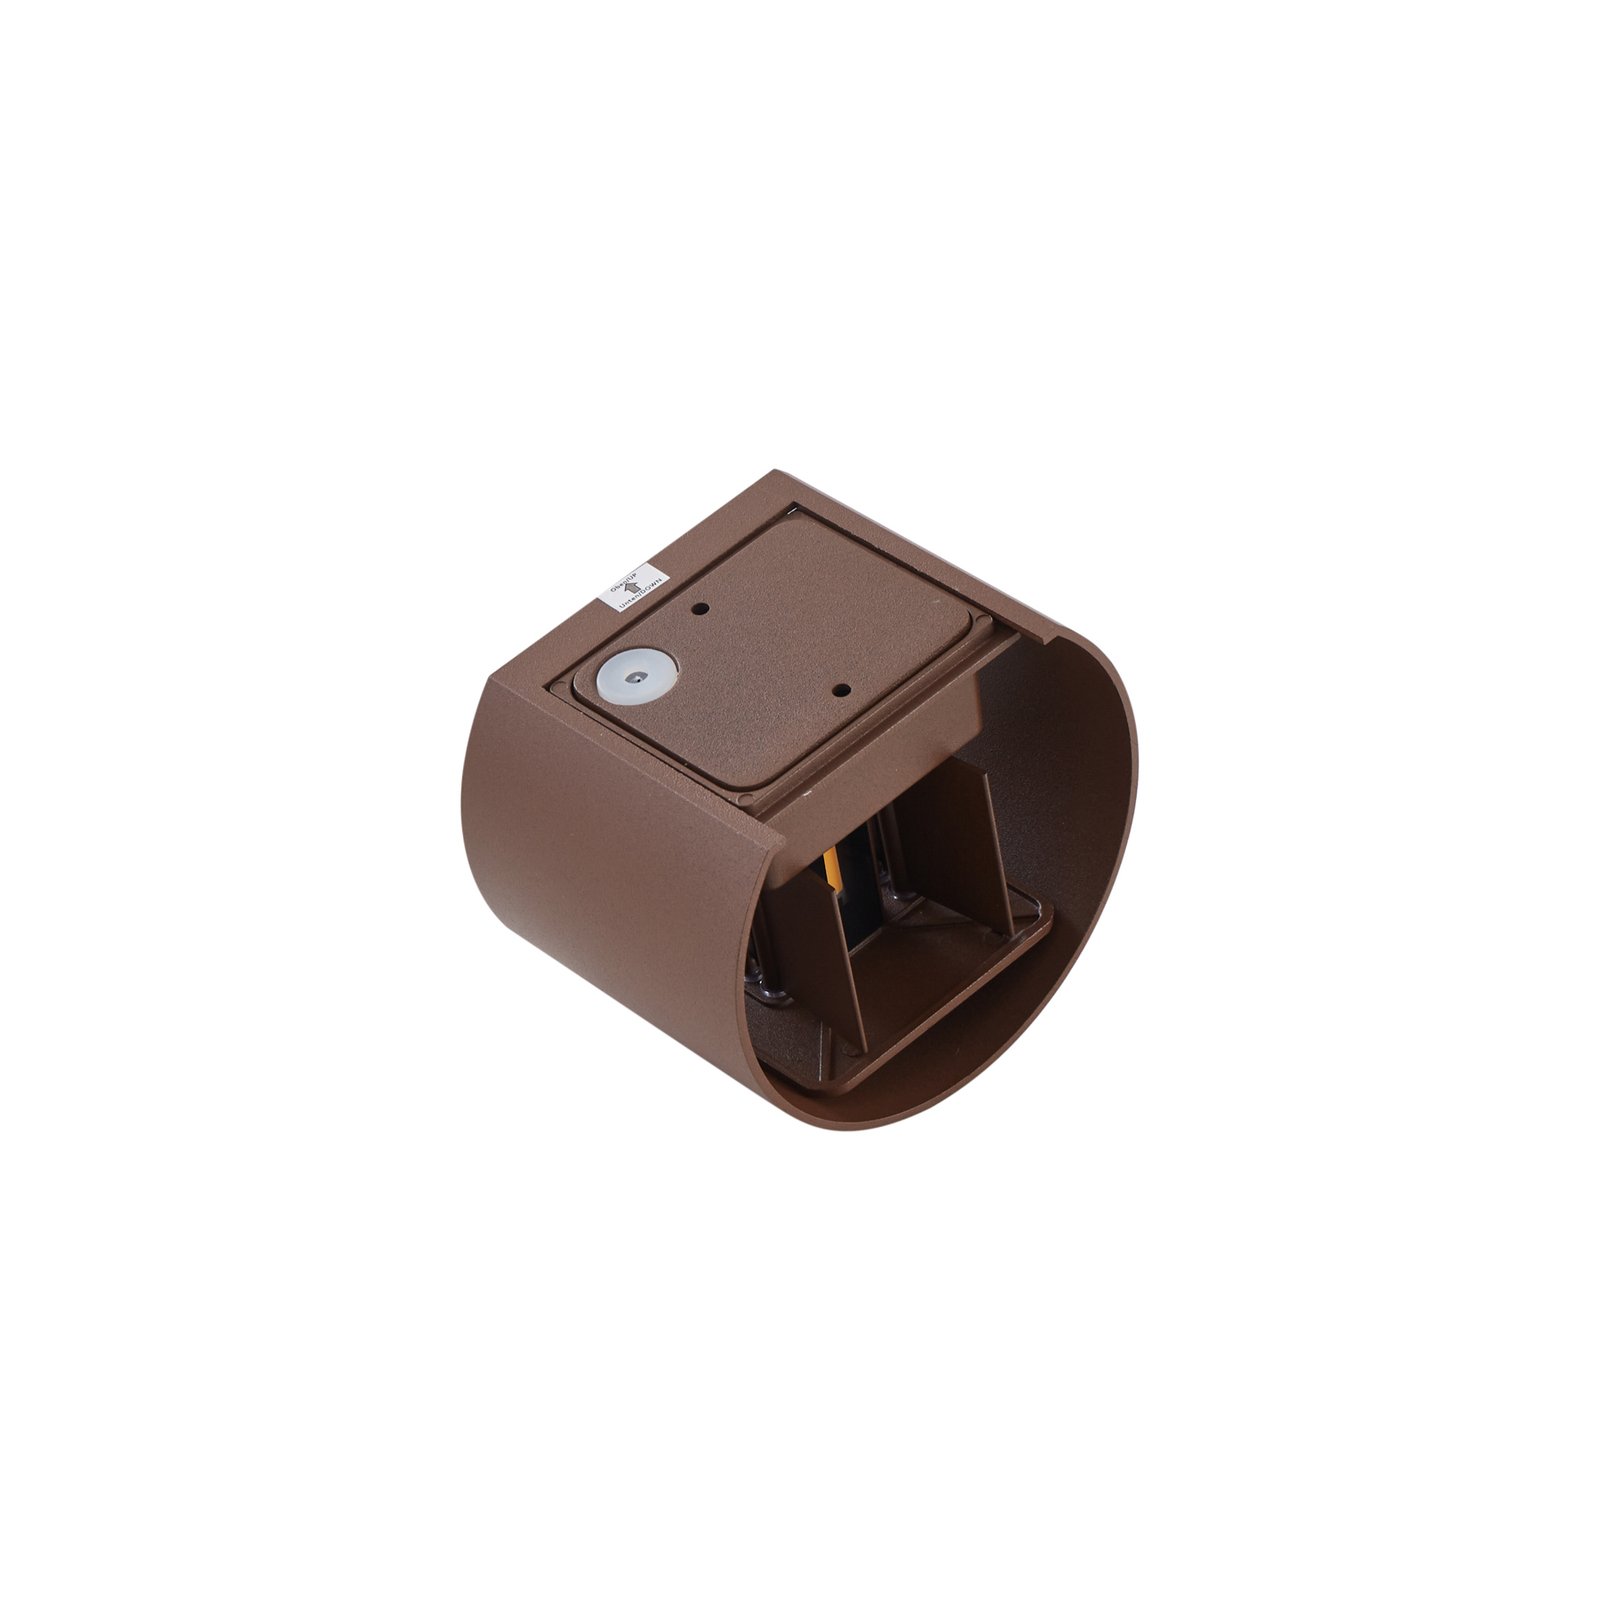 Lindby LED outdoor wall light Nivar, round, rust brown